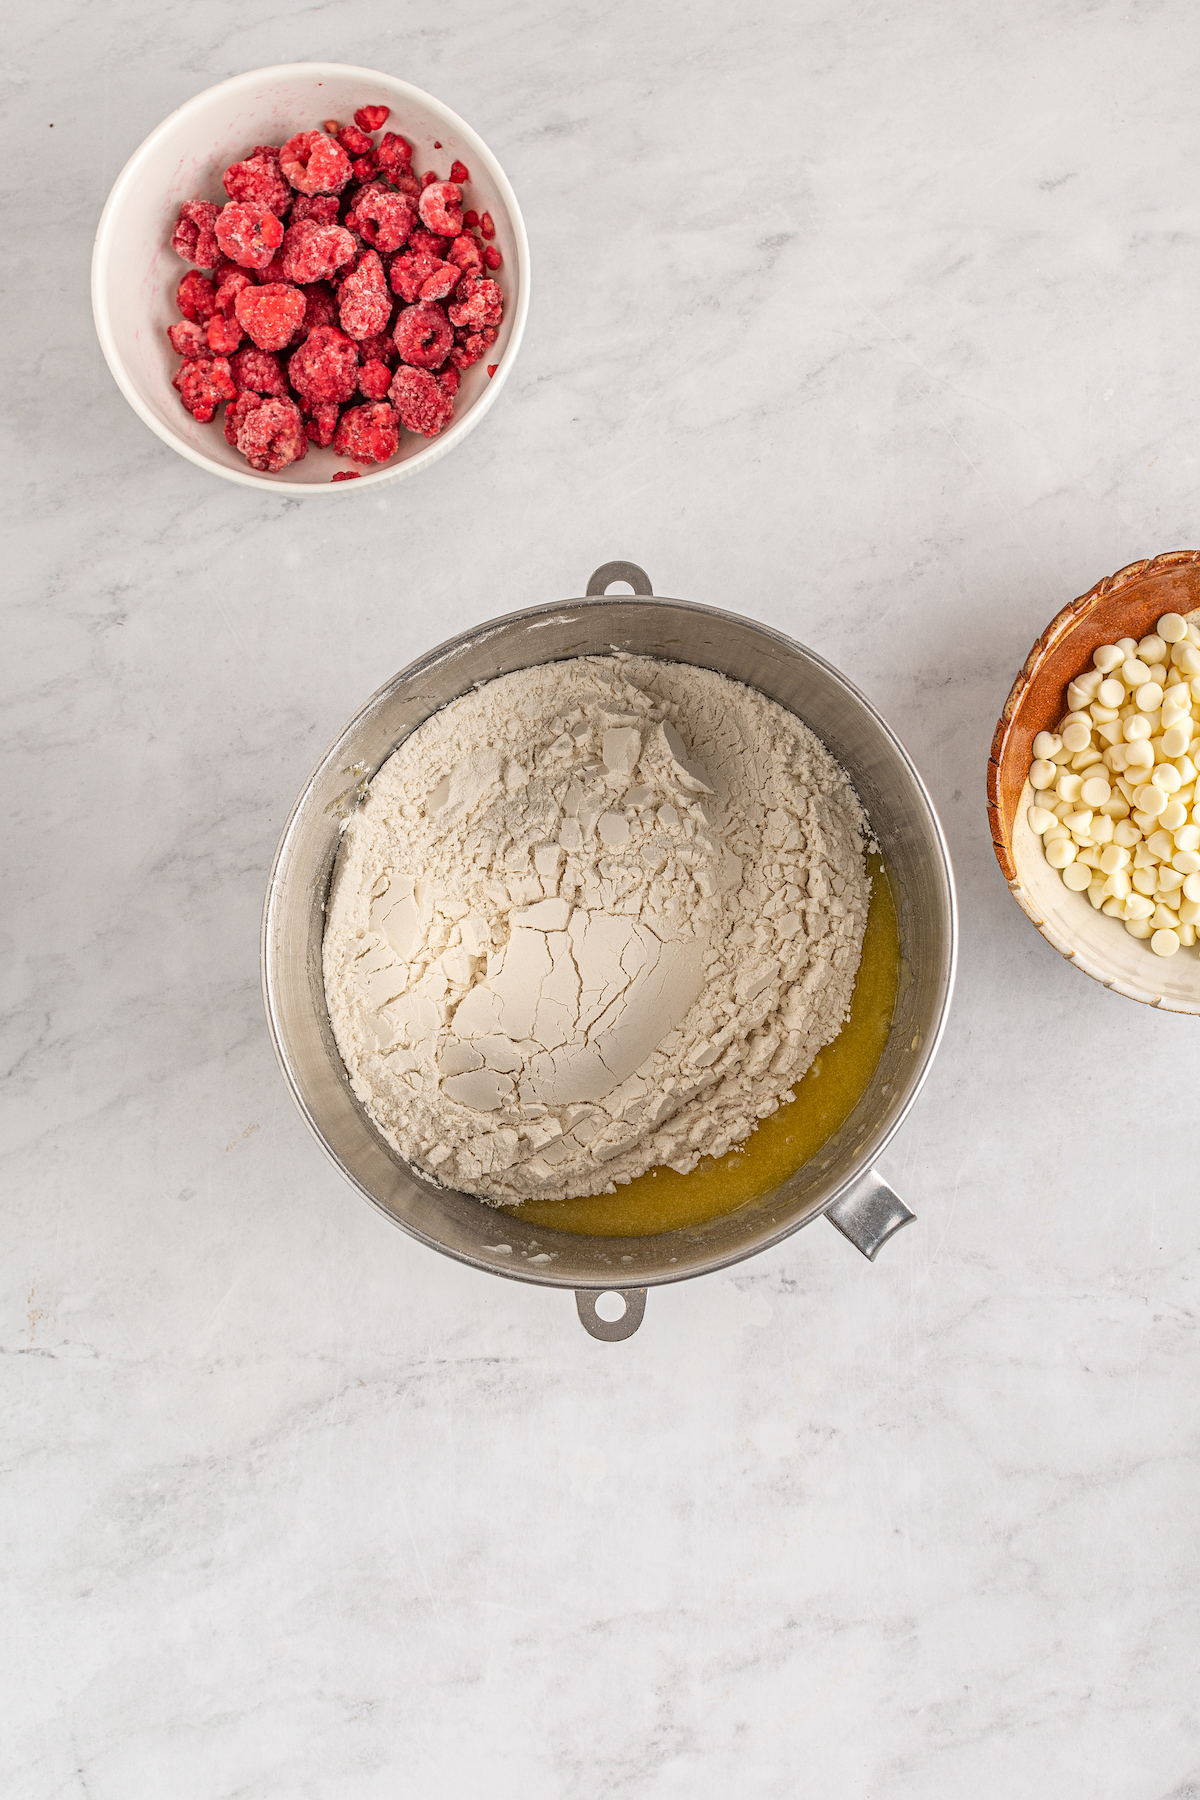 Dry ingredients on top of wet ingredients, in a metal mixing bowl. Raspberries and white chocolate chips are in bowls nearby on the work surface.